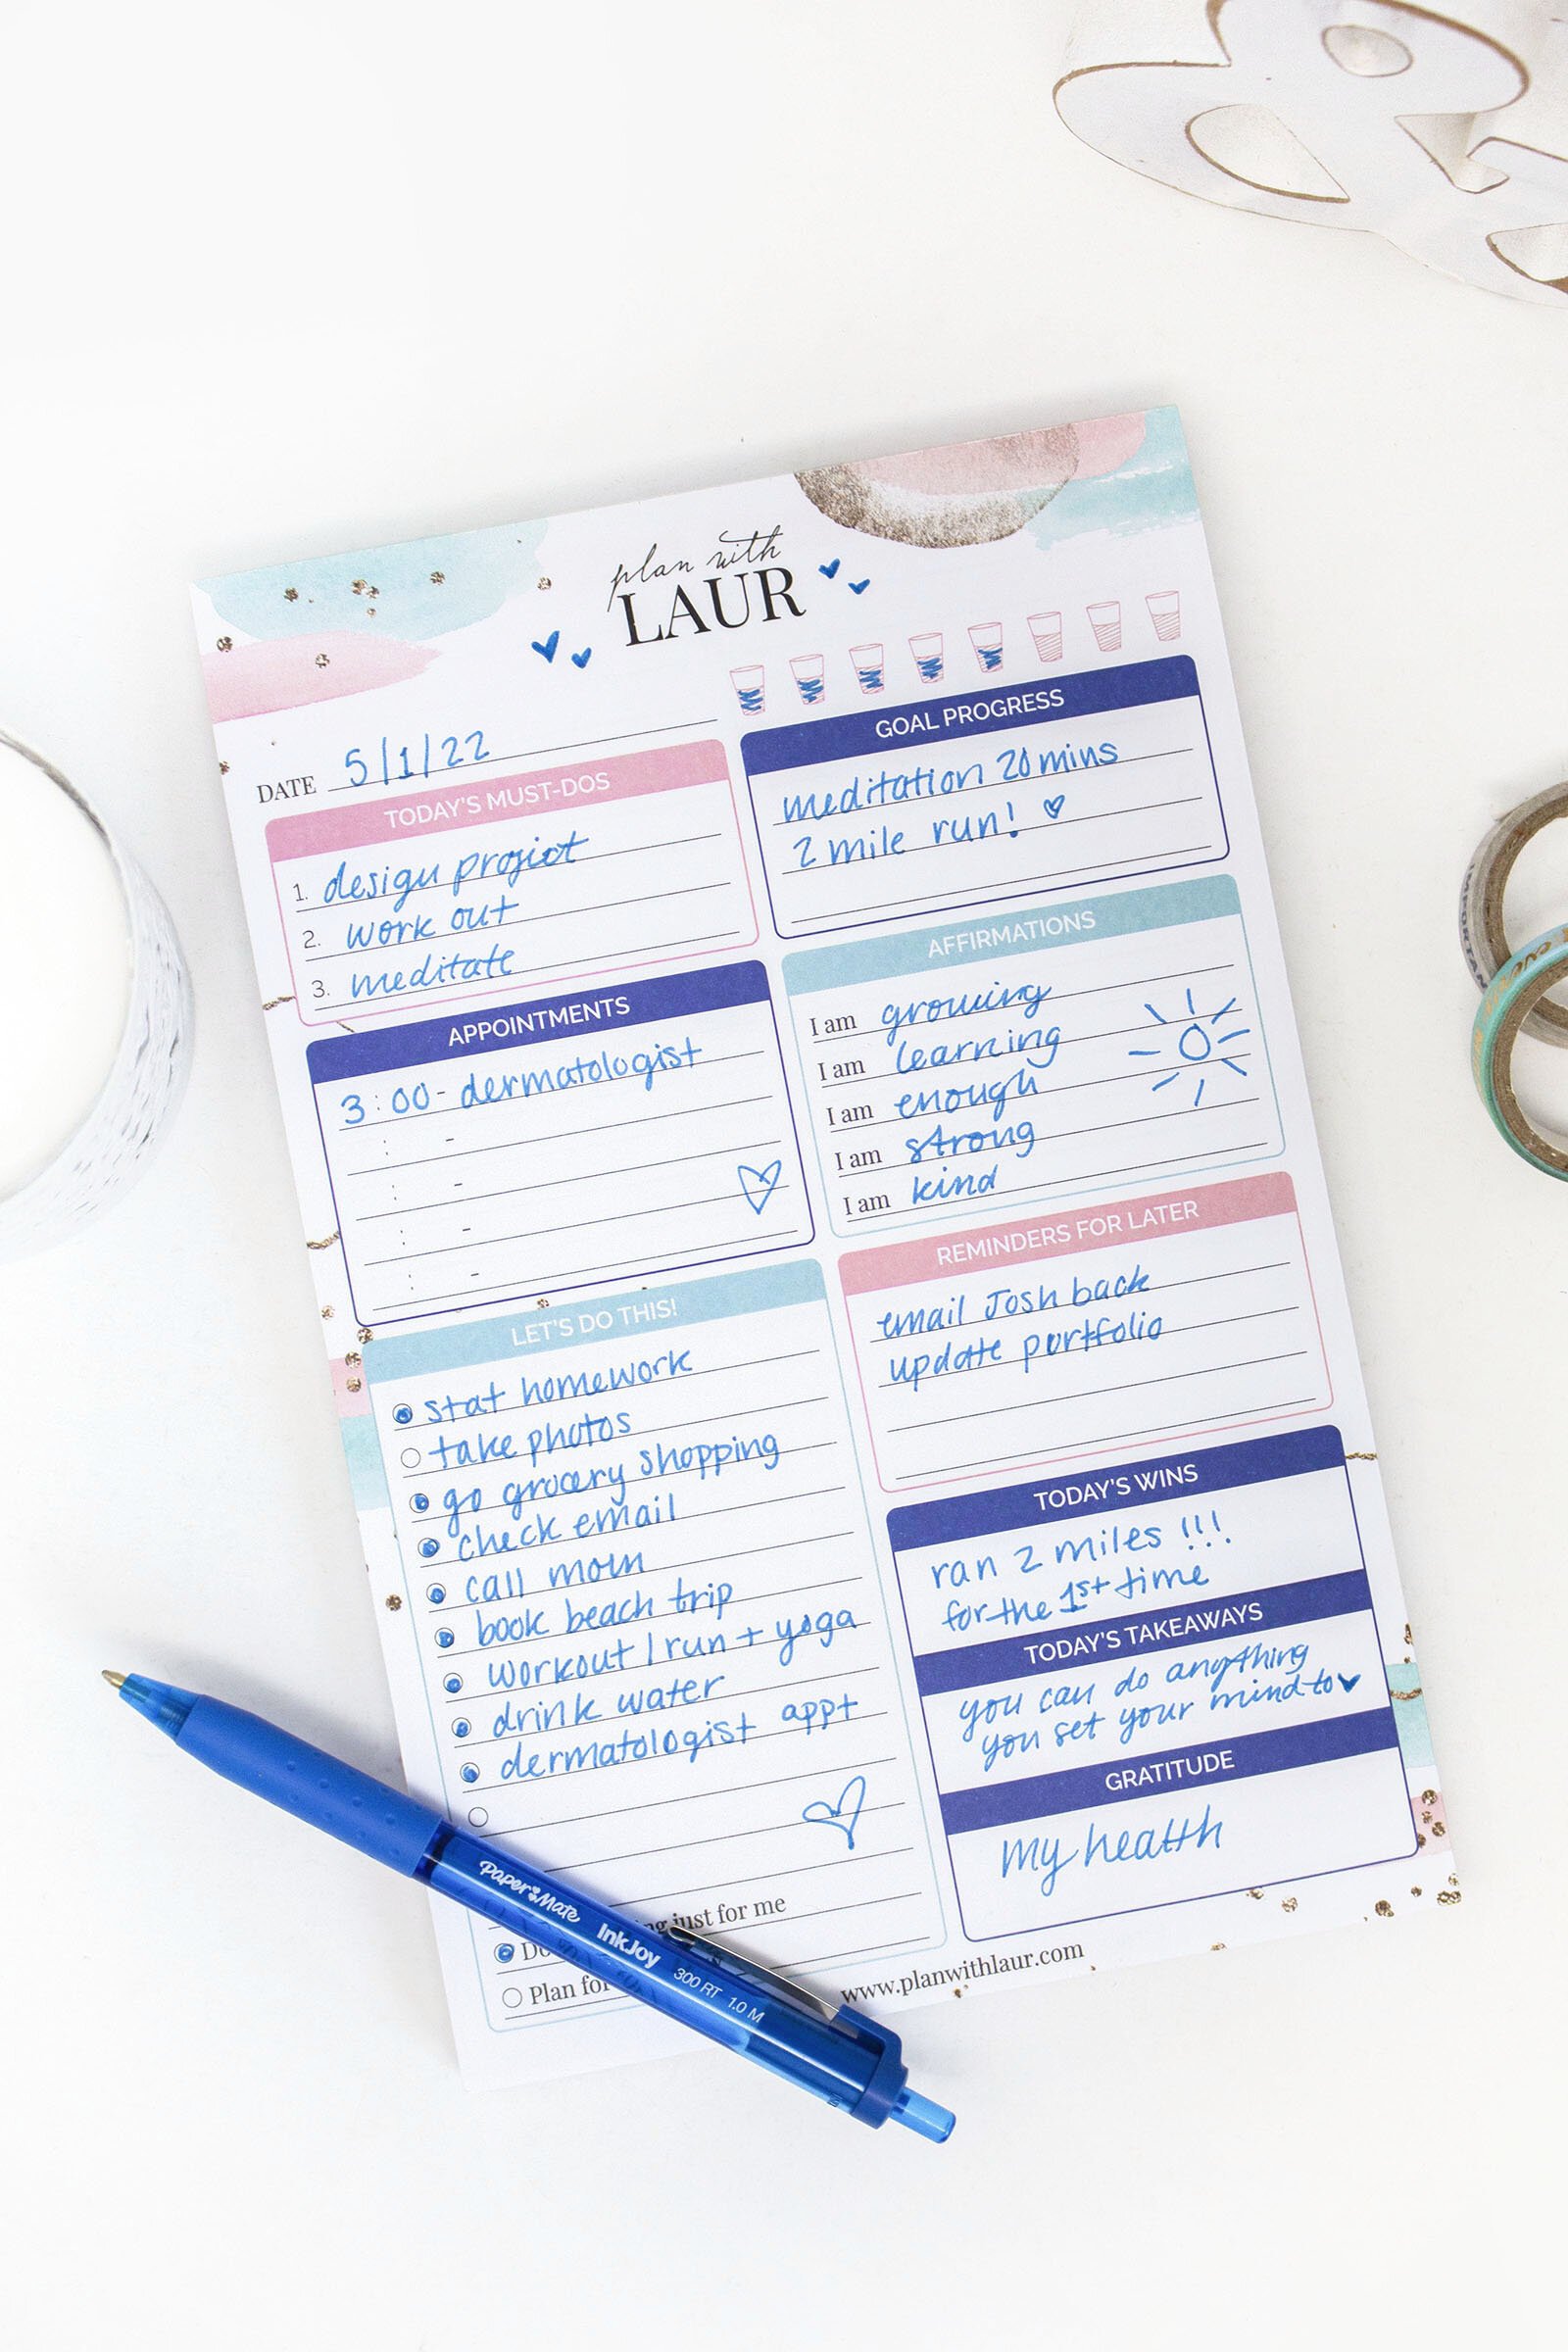 4_ 6 x 9 Plan With Laur Planning Pad _ bloom daily planners _ daily to do list for women goal tracking motivational abstract colorful pink blue checklist.jpg